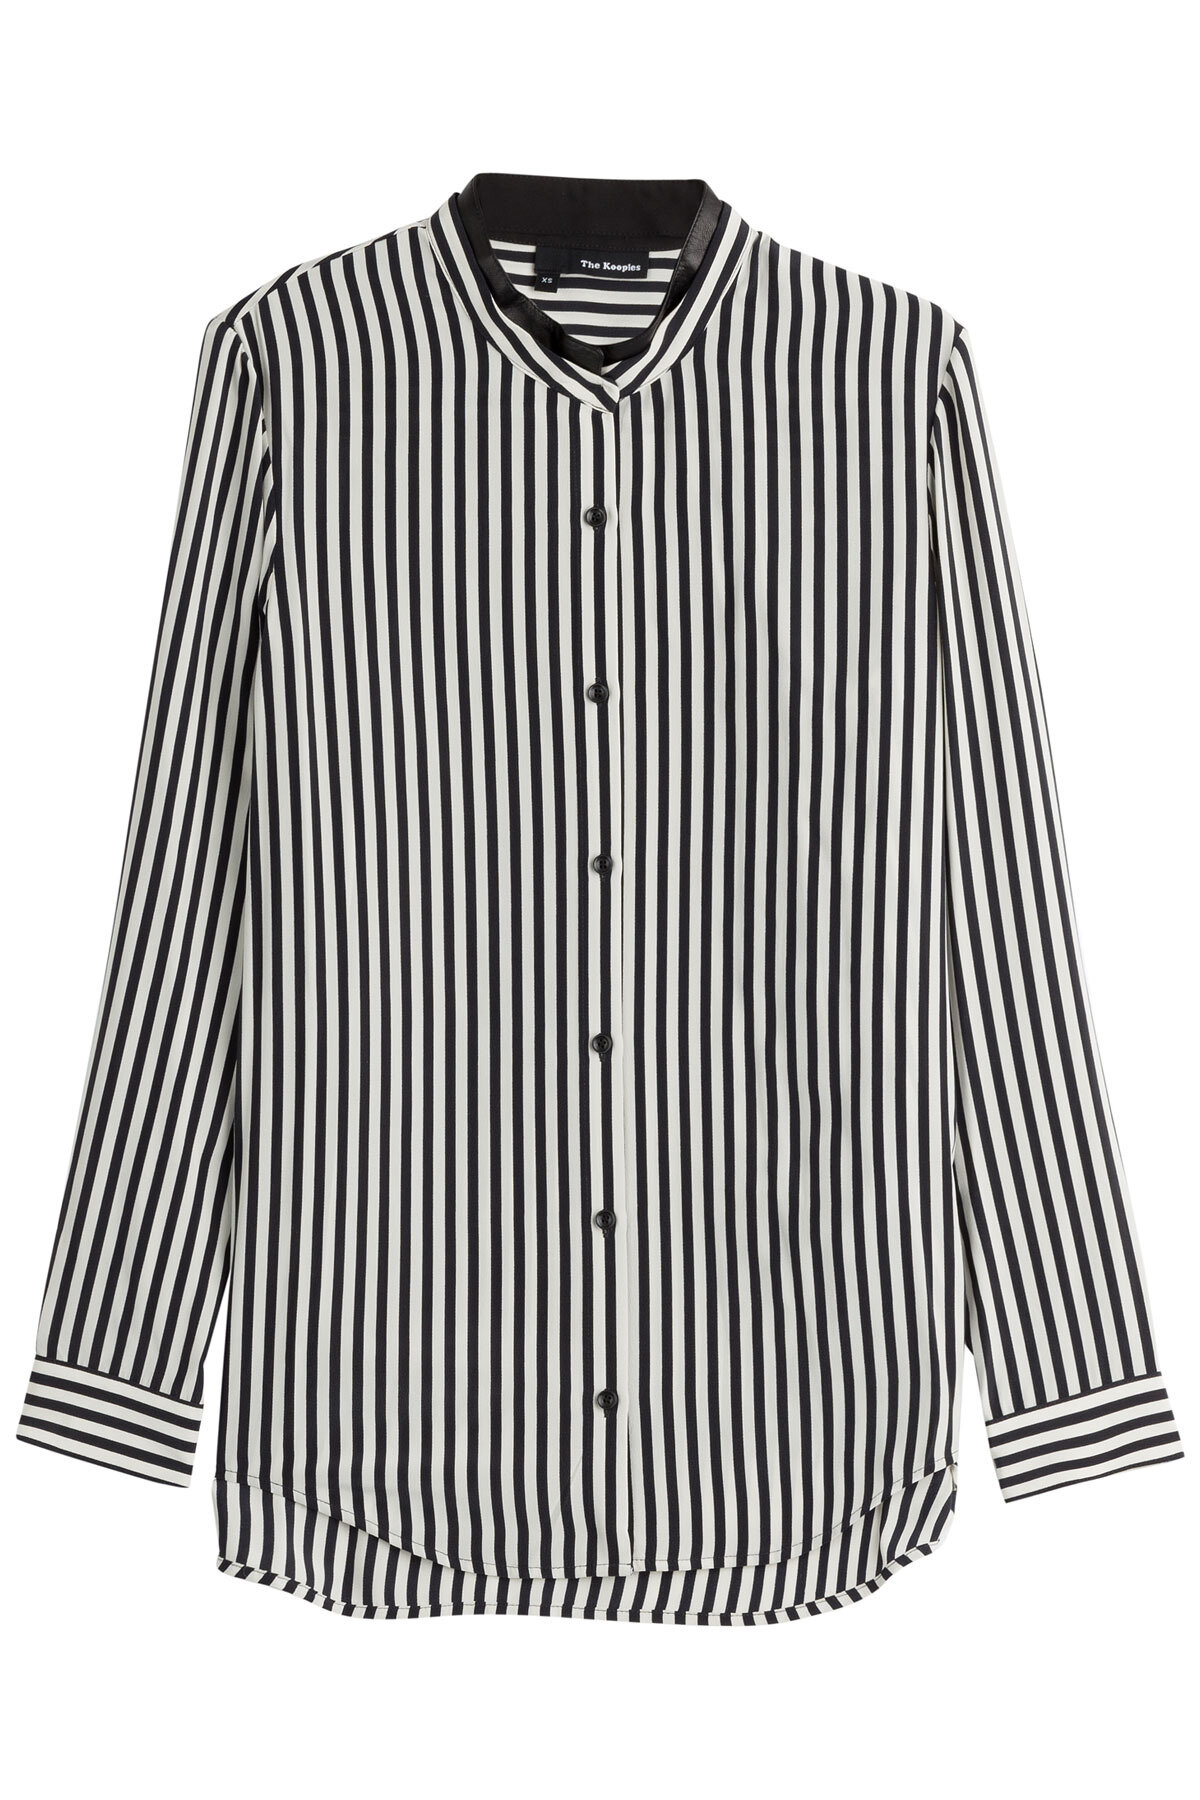 The Kooples Stripe Silk Blouse With Leather Trimmed Collar — UFO No More